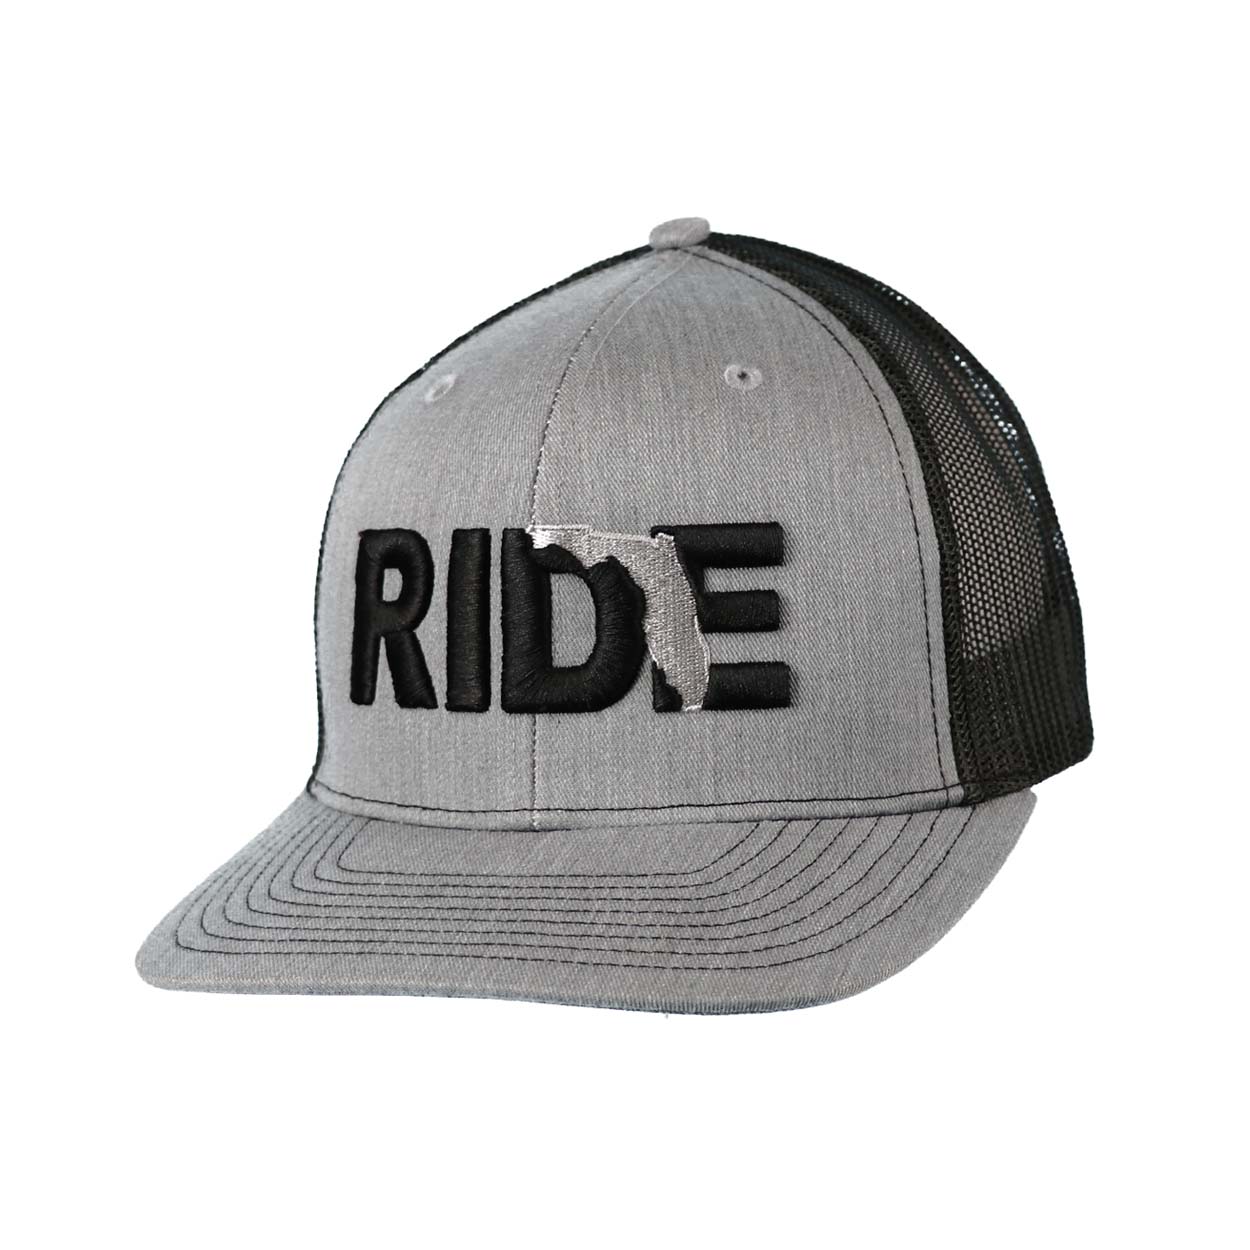 Ride Florida Classic Embroidered Snapback Trucker Hat Heather Gray/Black